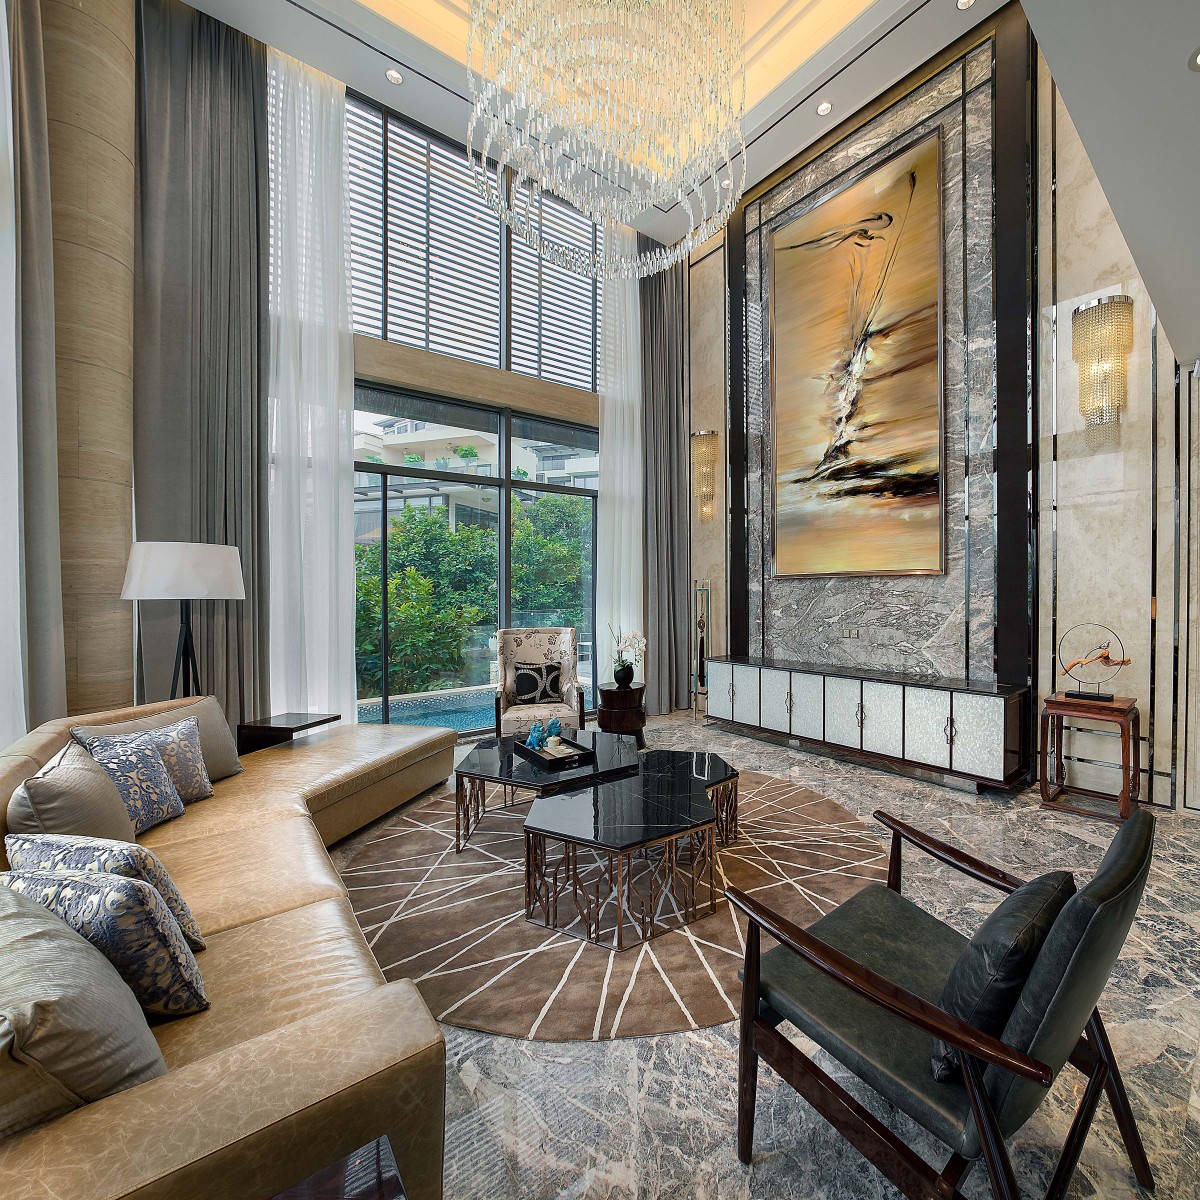 Chinese-Western of Luxury Residential House by Tony Cheng